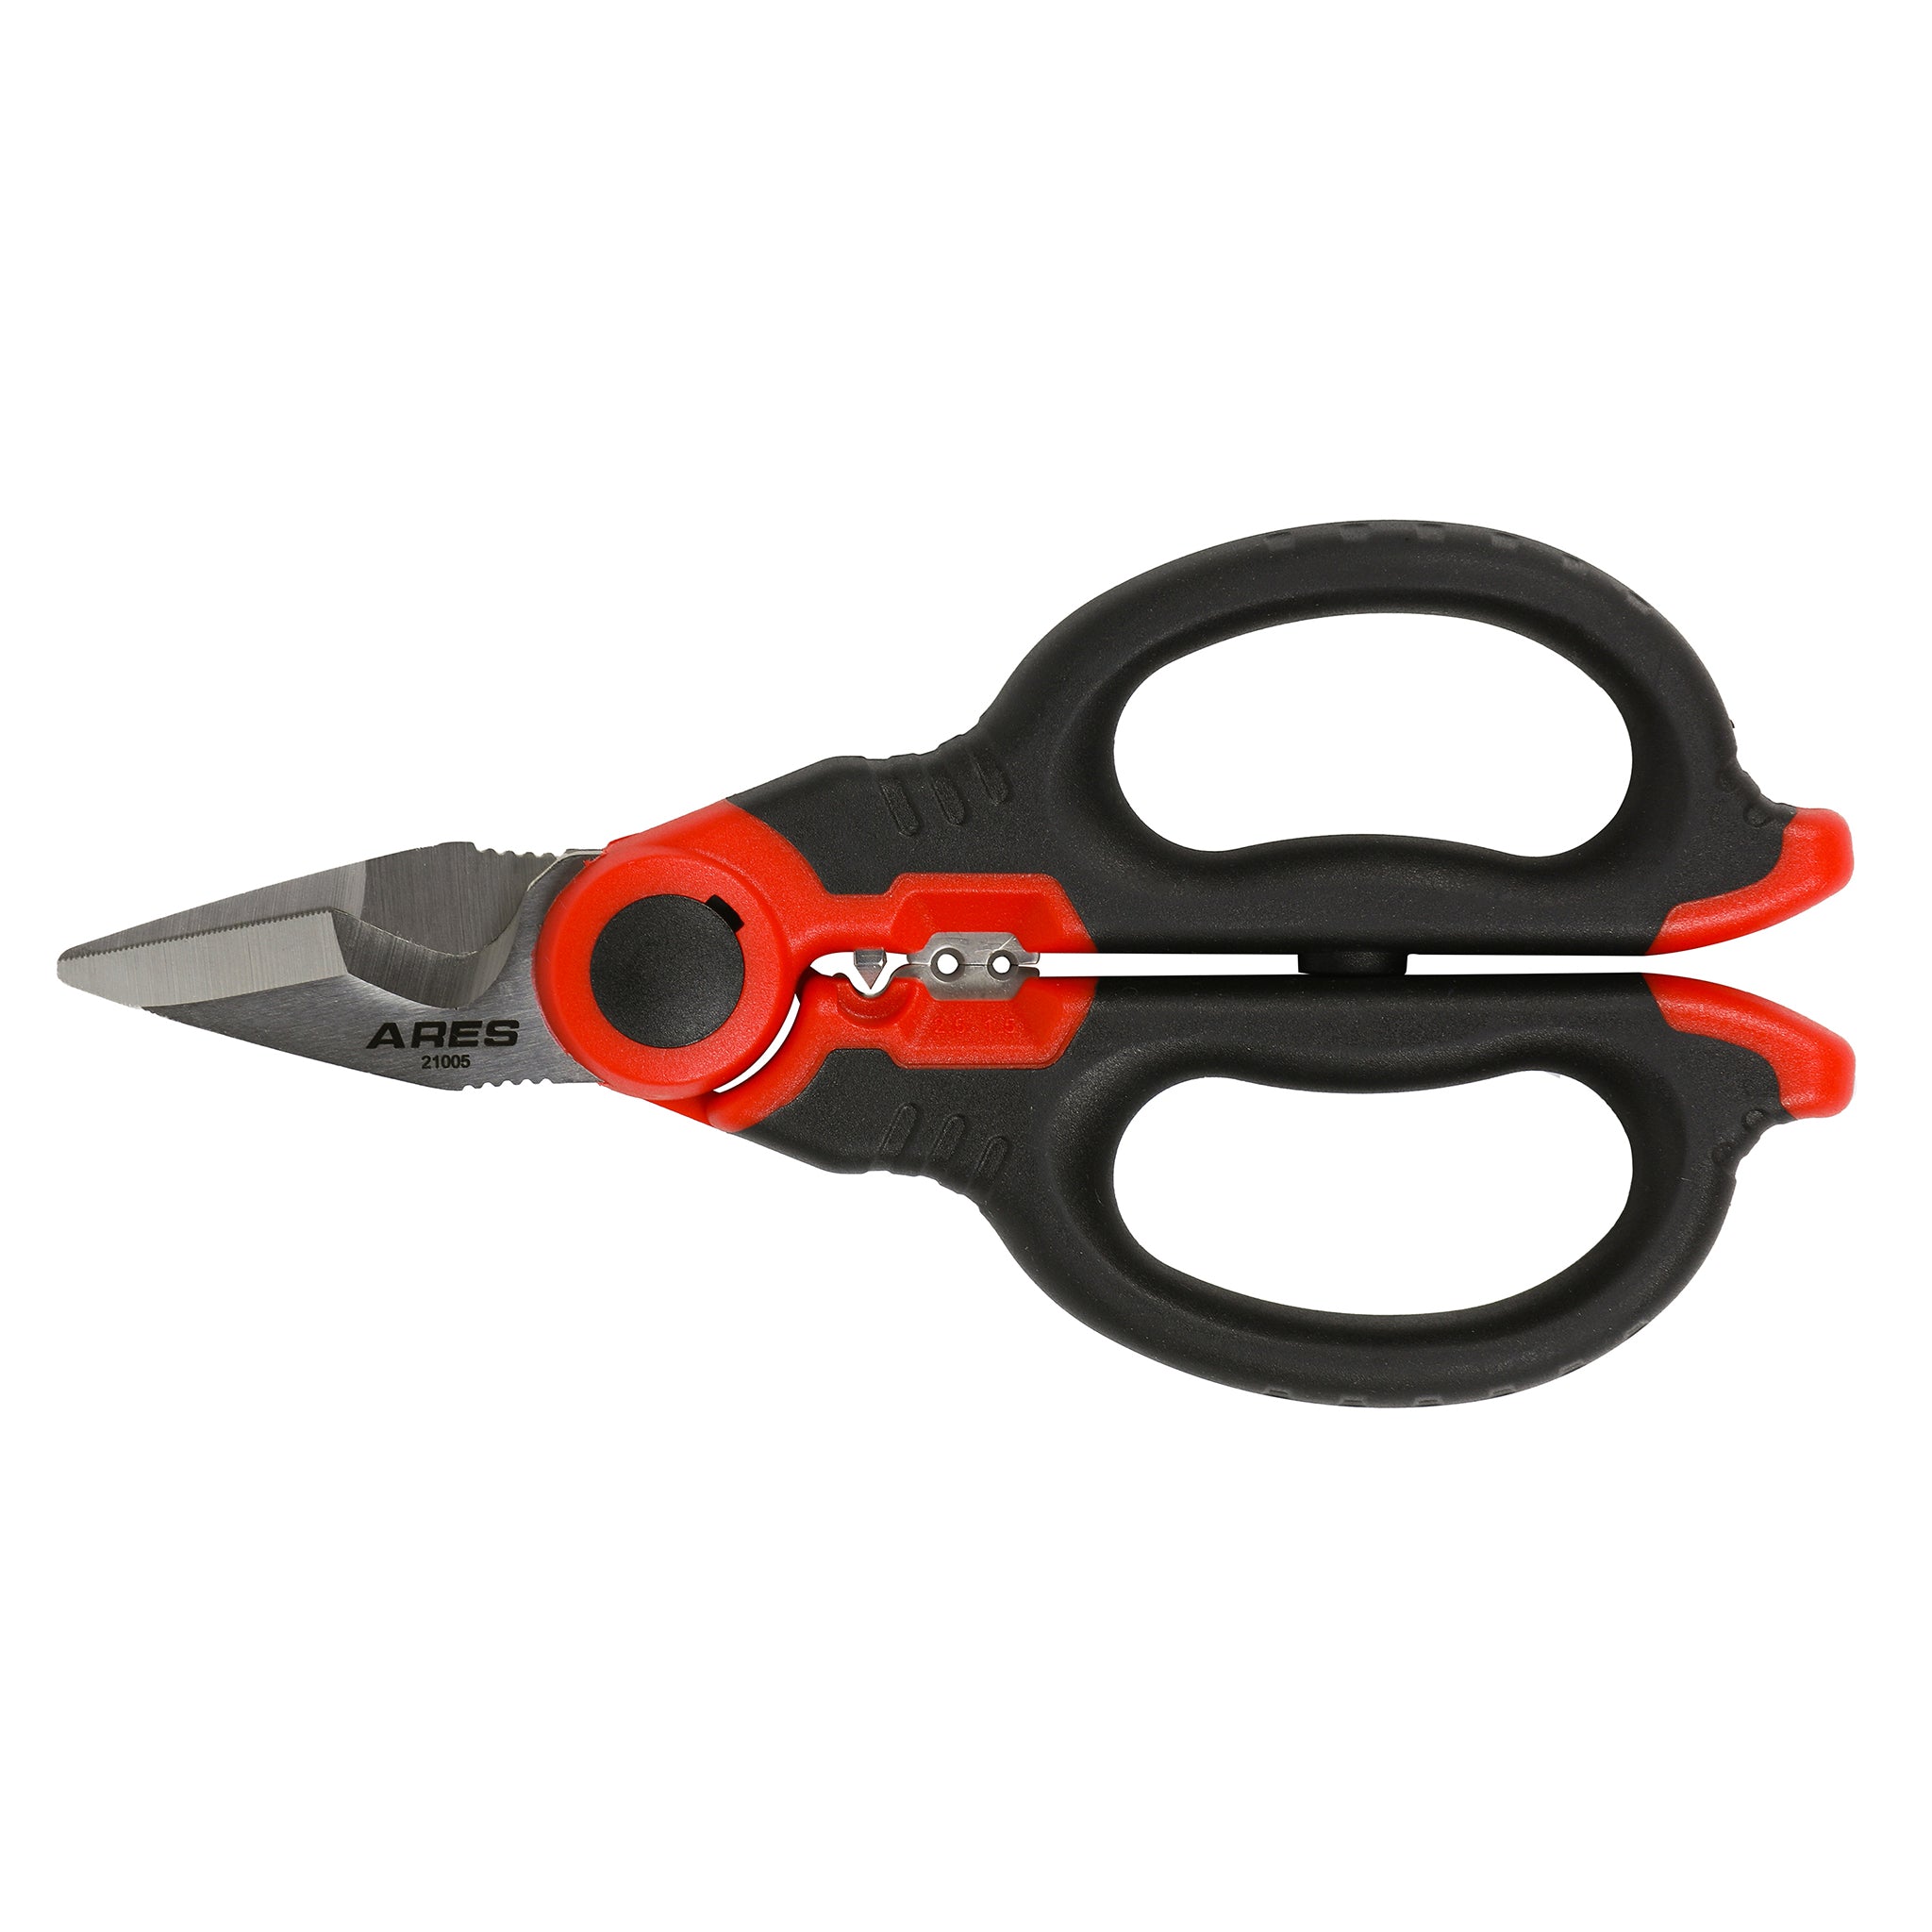 6 in. Electrical and Data Cable Scissors